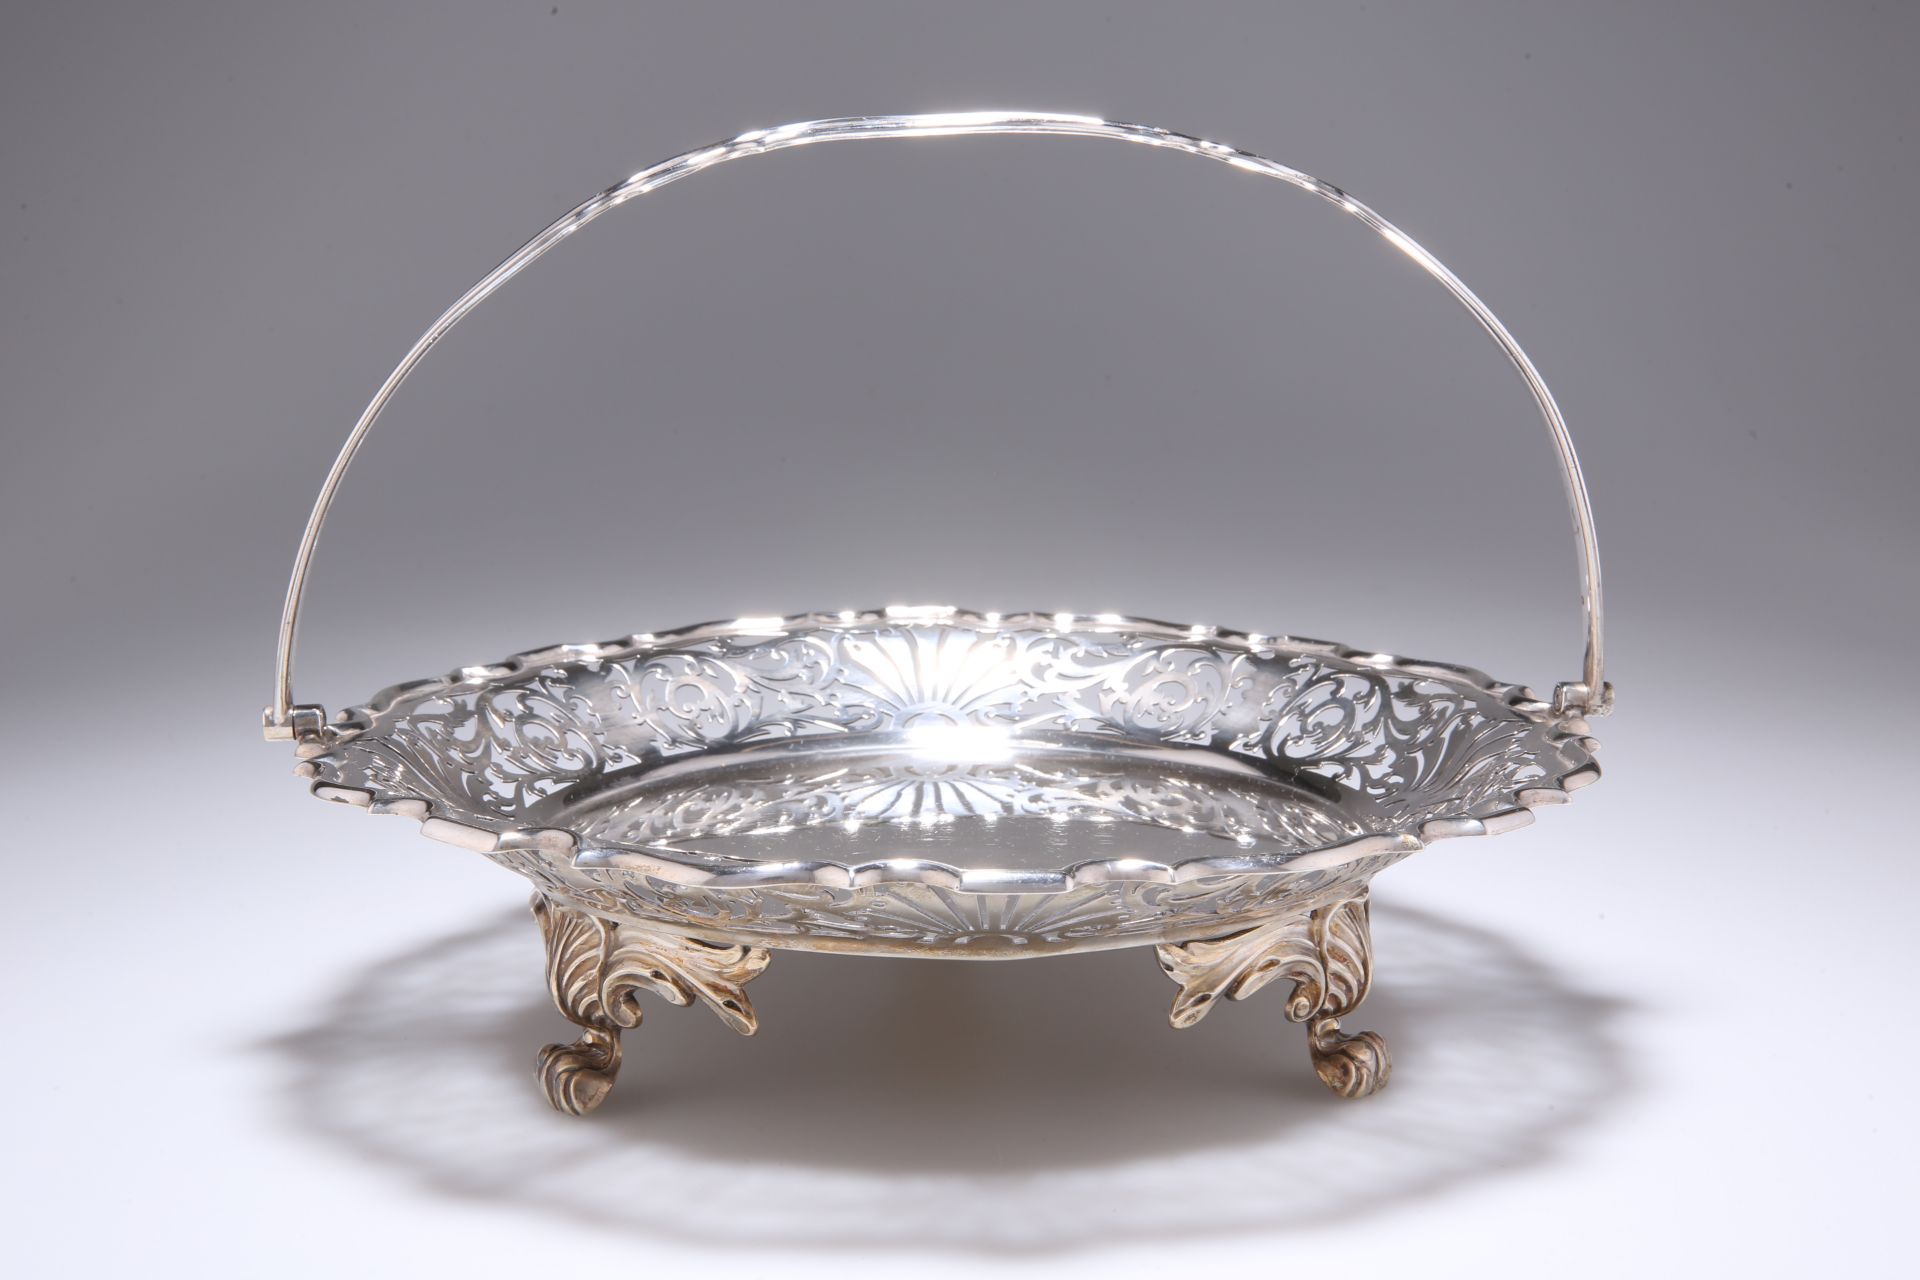 A GEORGE V SILVER CAKE STAND, by Walker & Hall Sheffield 1926, of circular form with pie crust